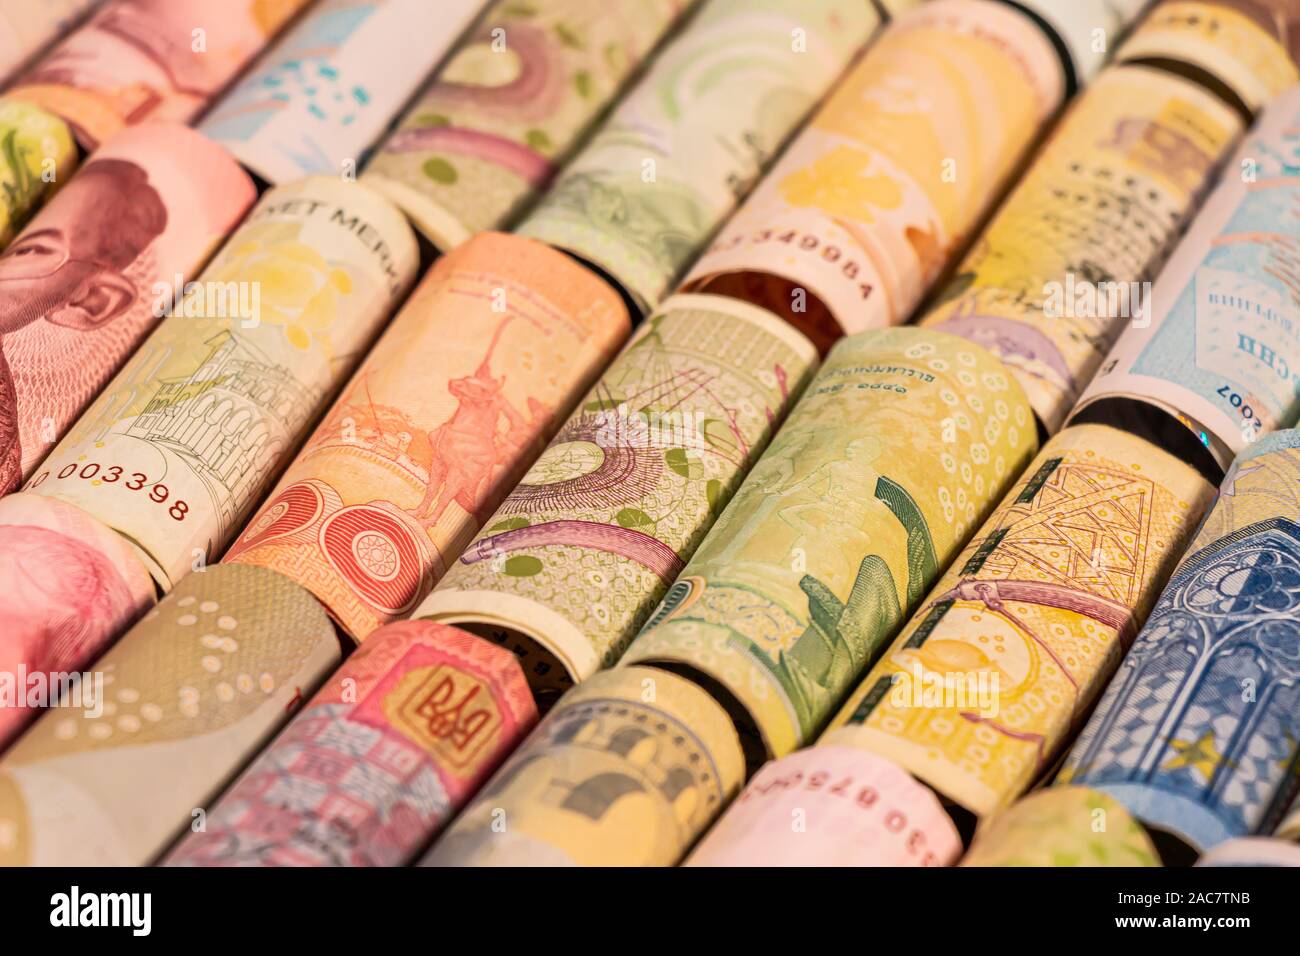 Different colourful banknotes from various countries on rolls to be used for illustrating subjects as business, banking, media, etc. Stock Photo